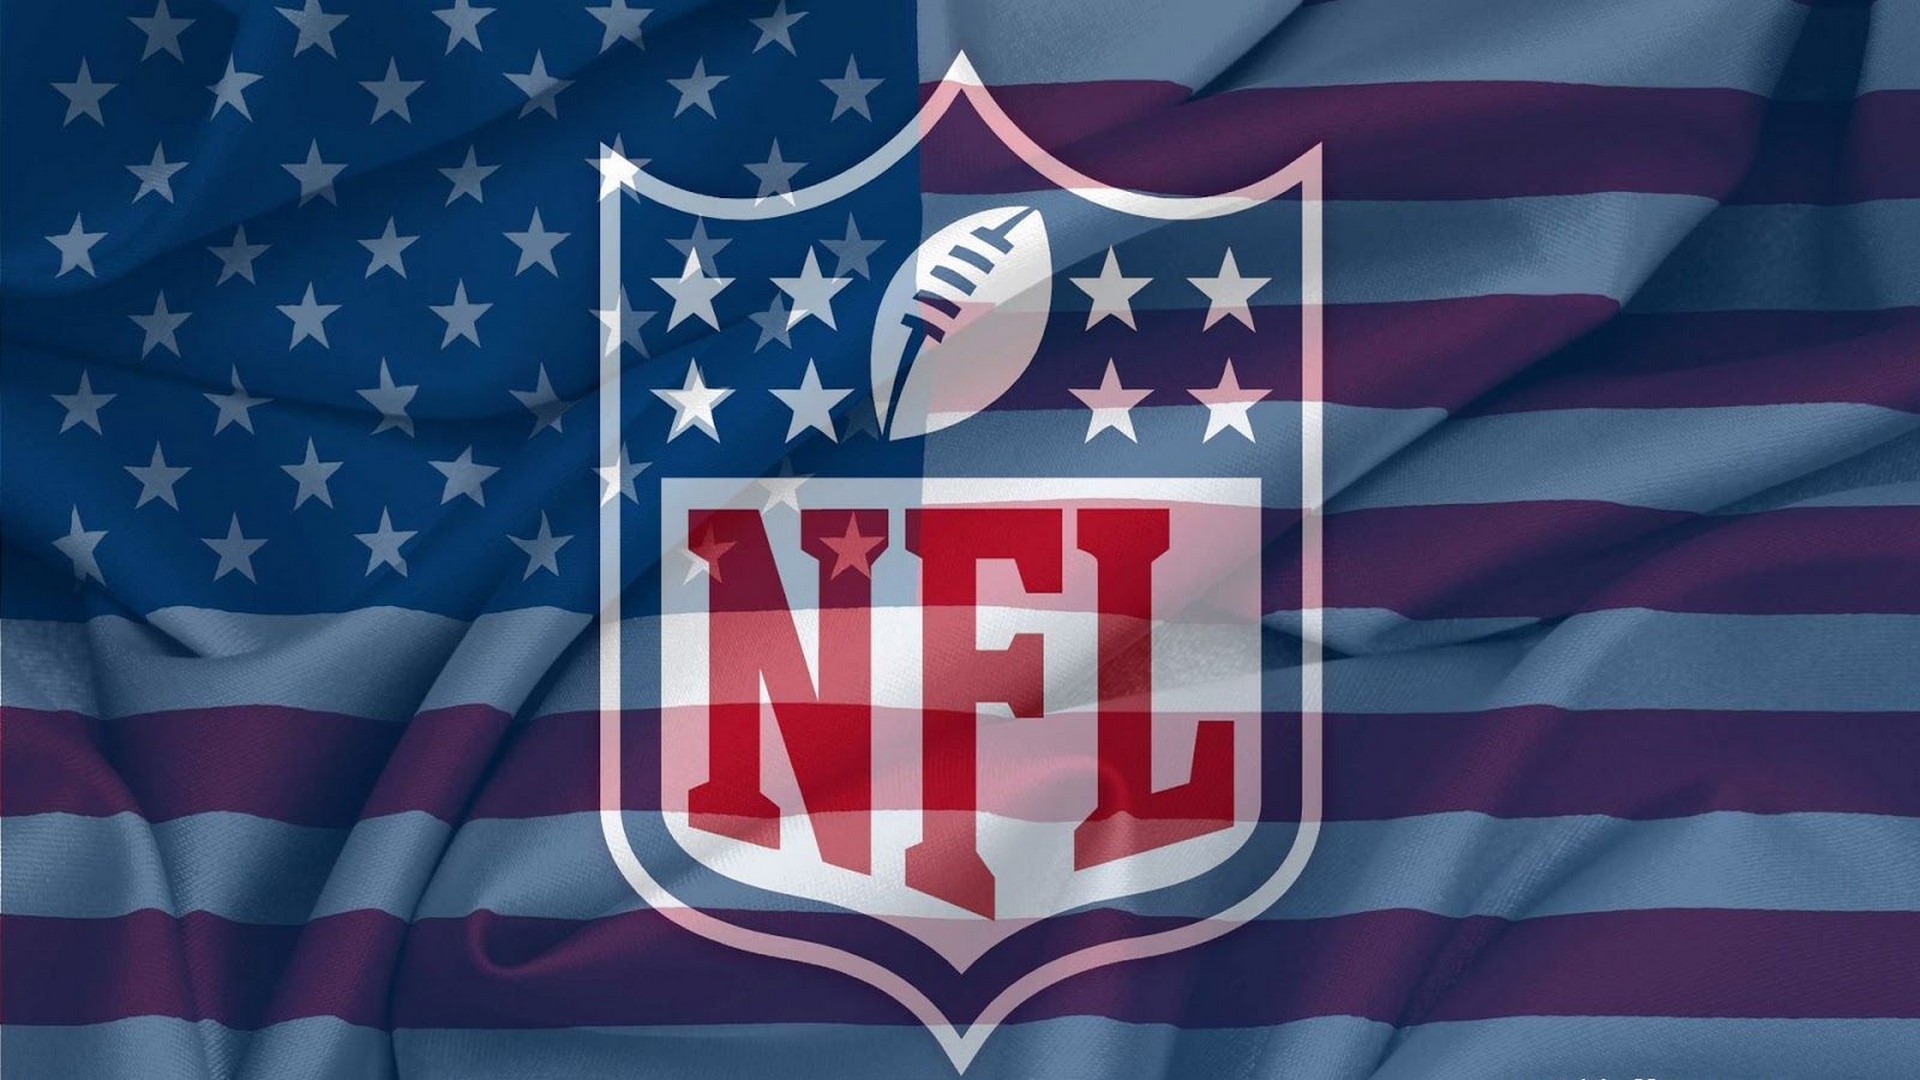 NFL Wallpaper For Mac Backgrounds With Resolution 1920X1080